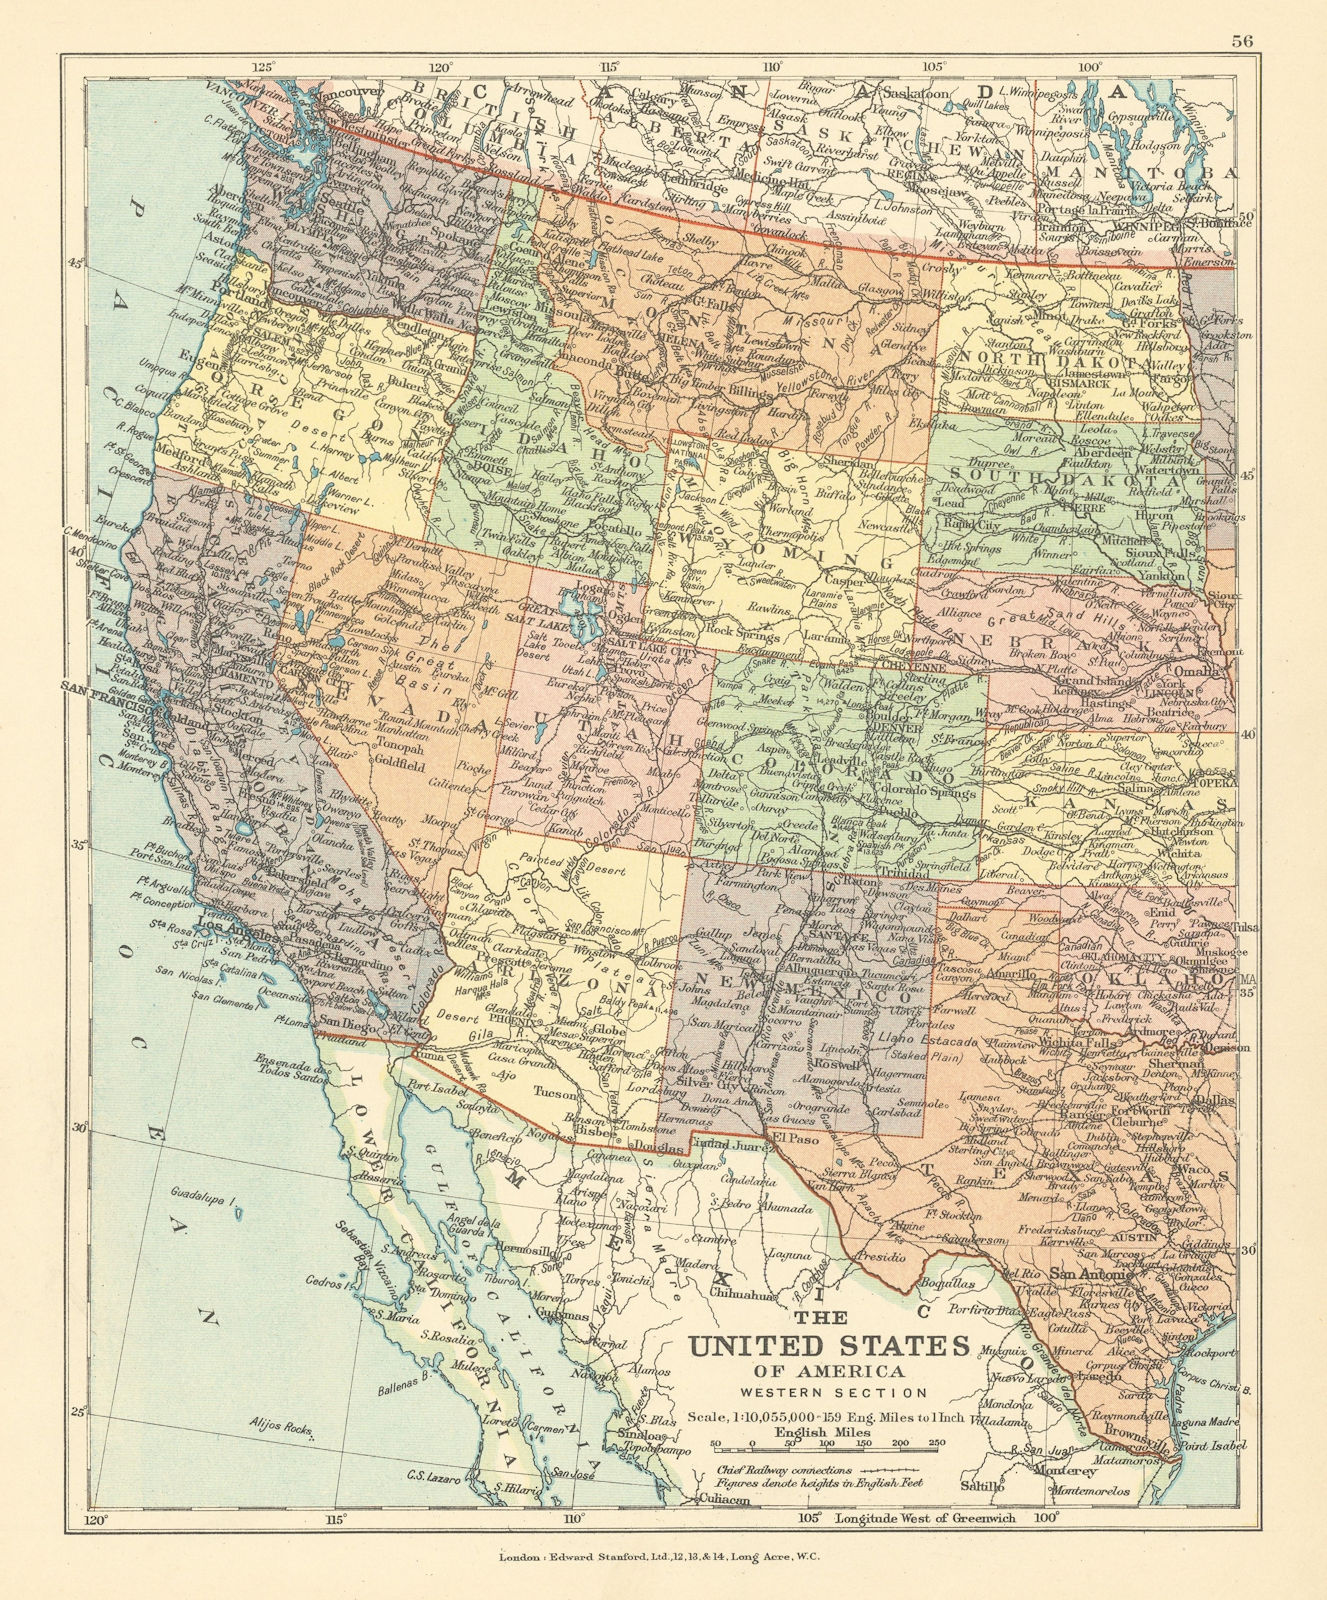 Associate Product United States of America, Western Section. USA. STANFORD c1925 old vintage map